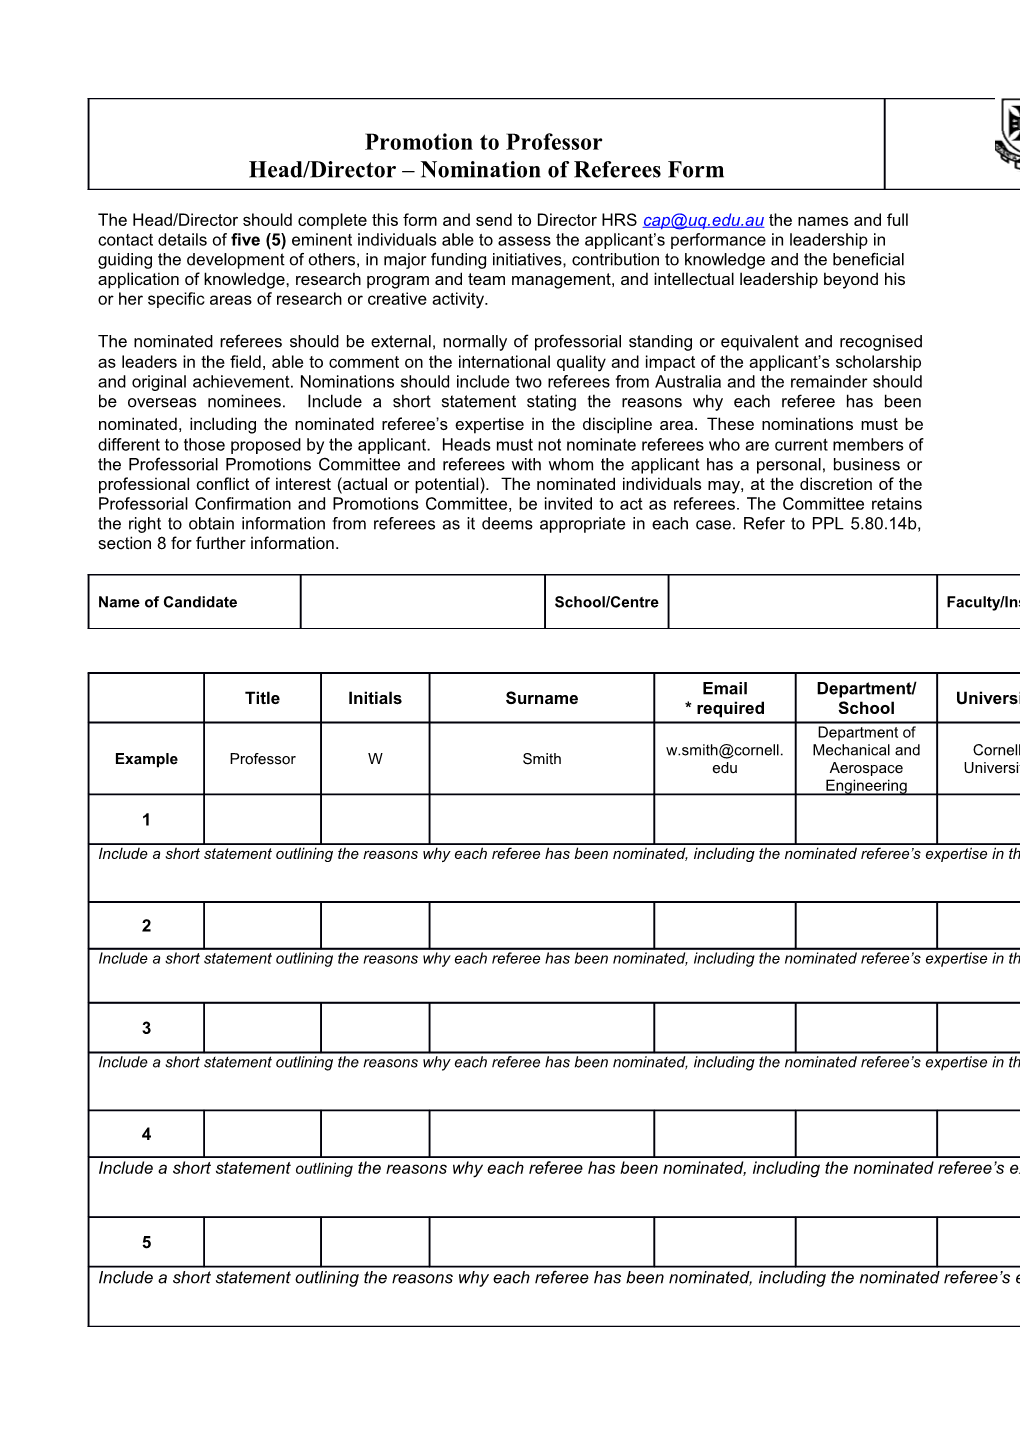 The Head/Director Should Complete This Form and Send to Director HRS the Names and Full